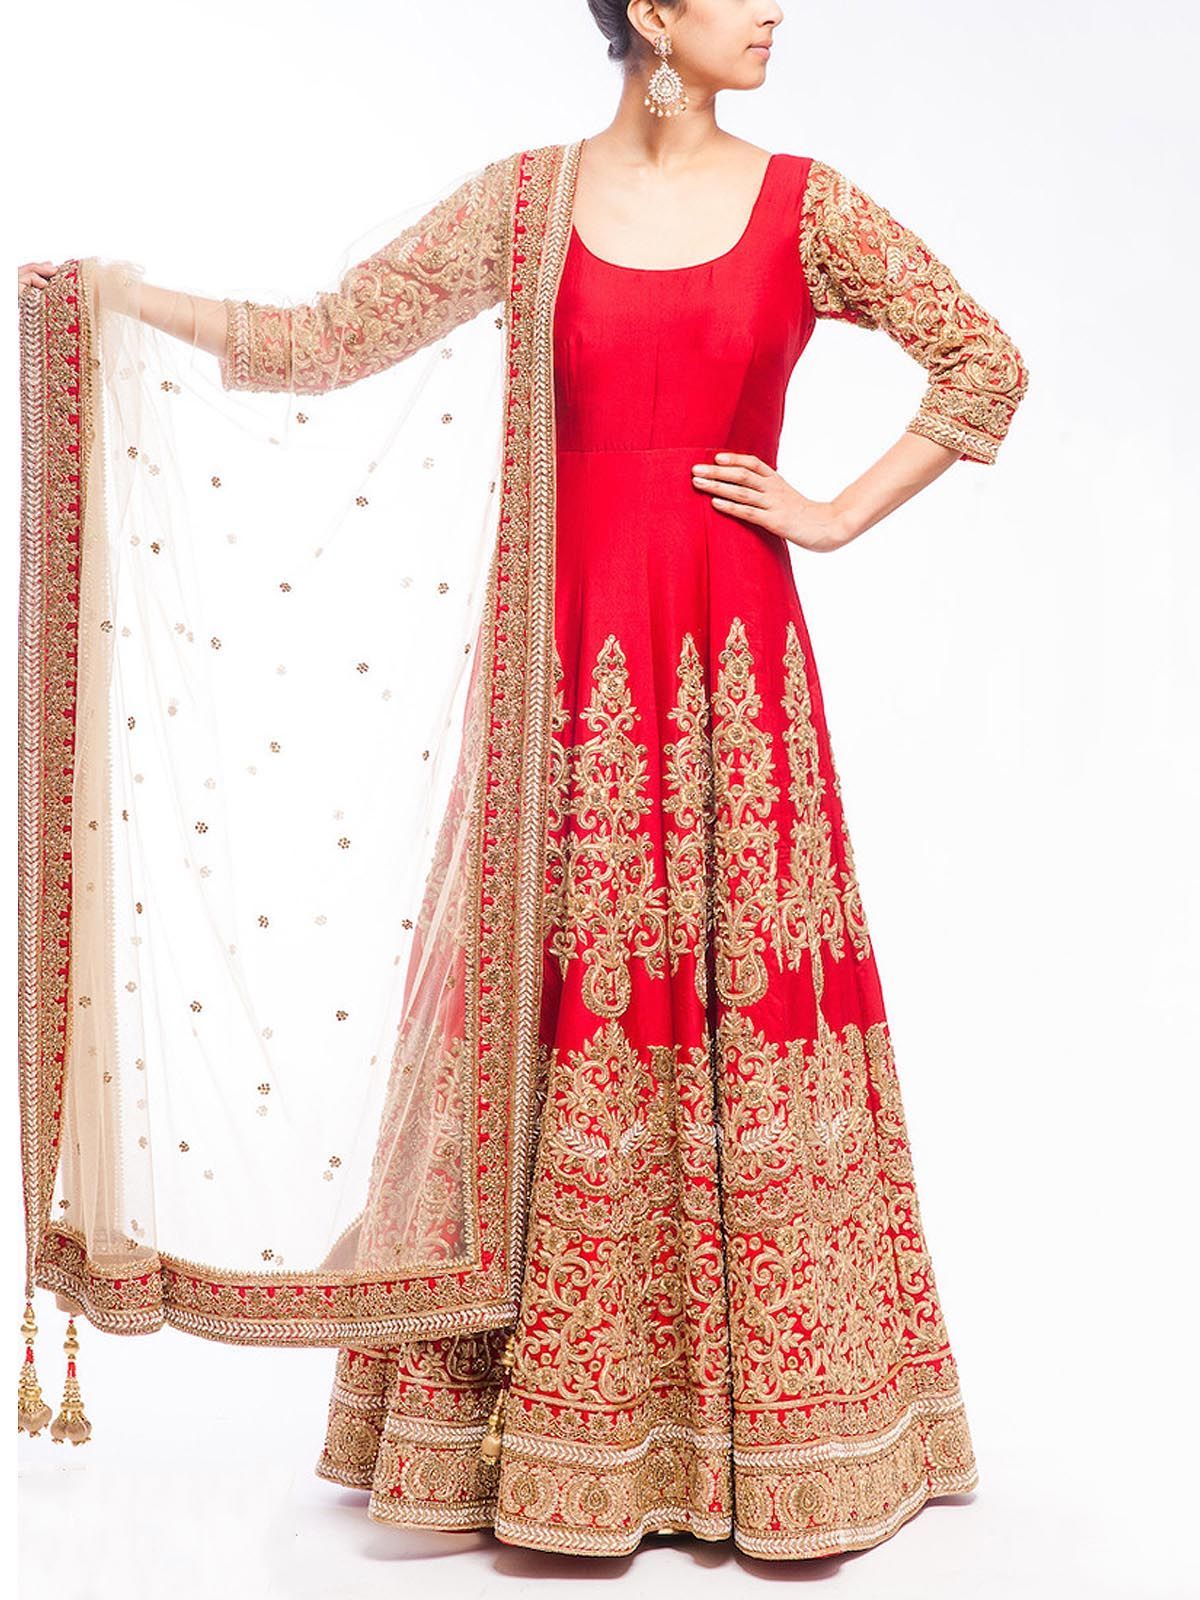 Stylish Exclusive Anarkoli Gown Dress For Women at Best Price in Bangladesh